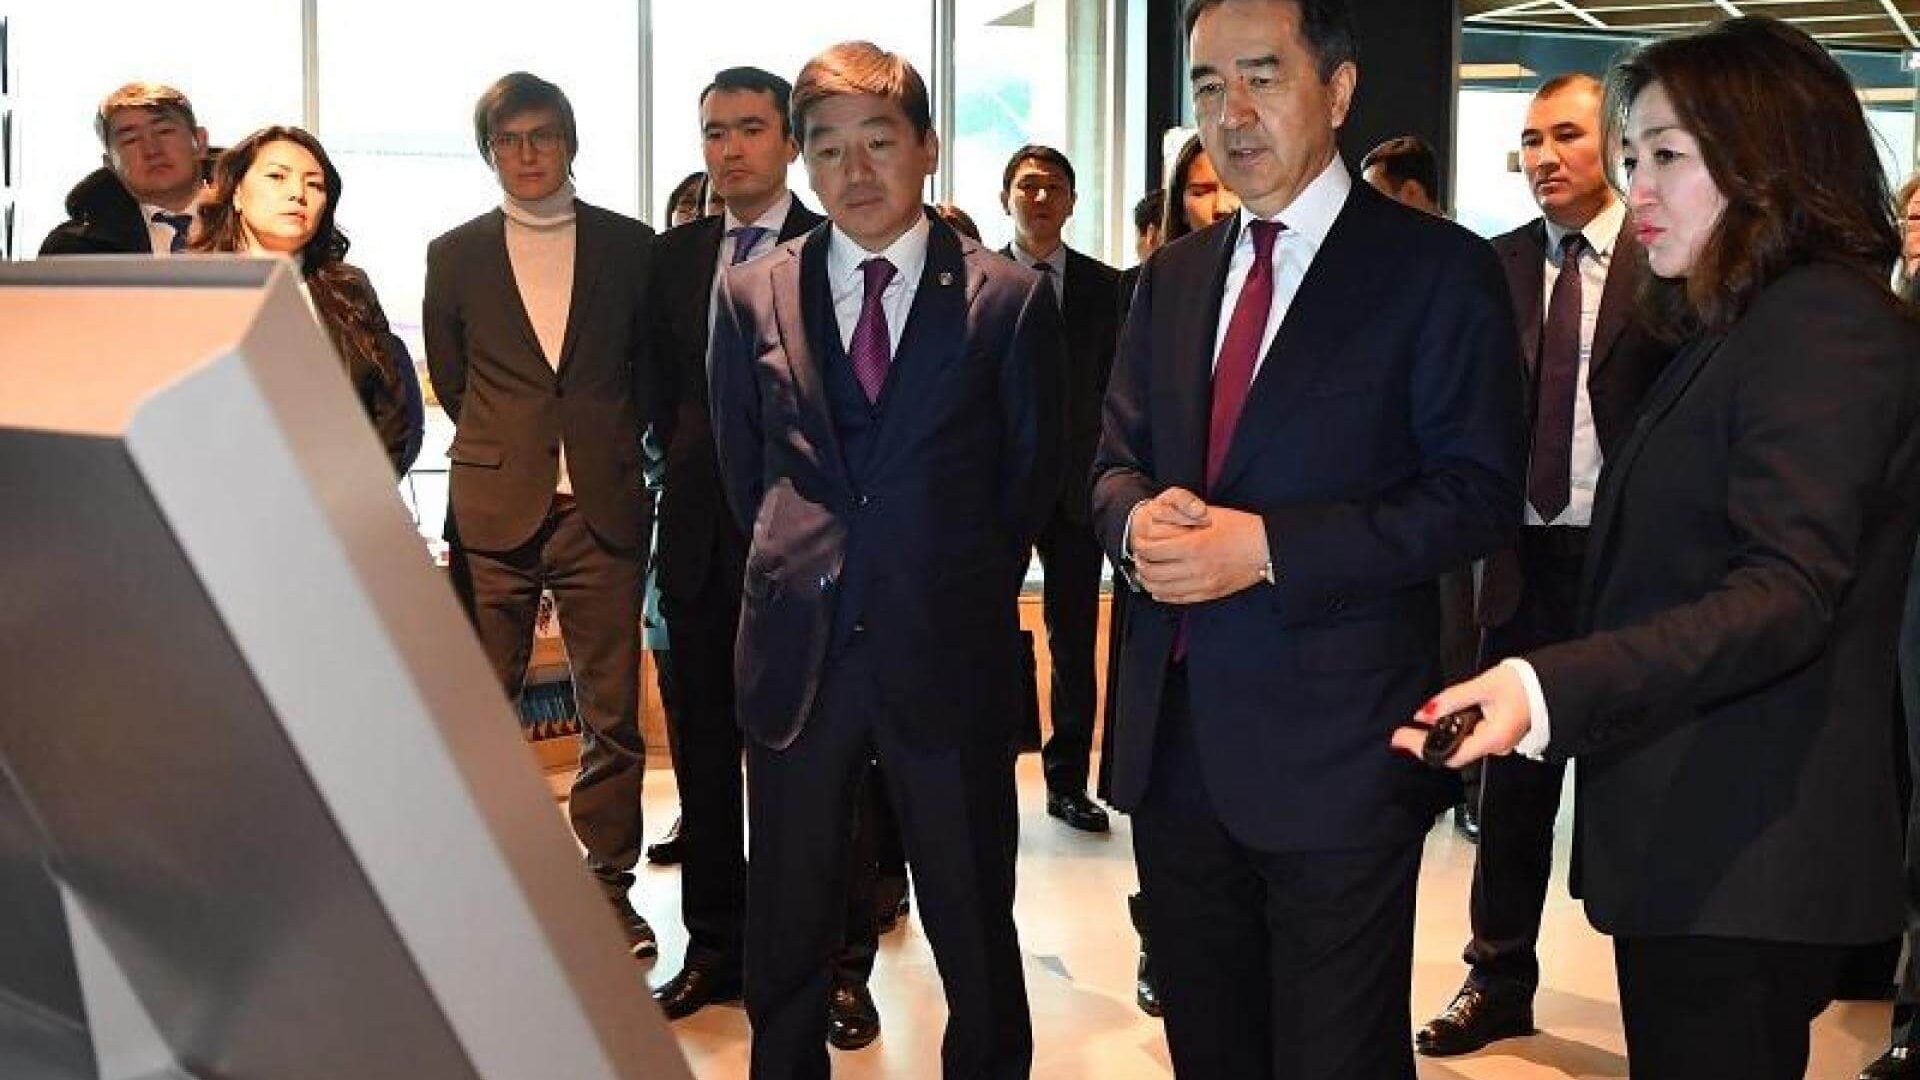 Prime Minister Bakytzhan Sagintayev learned about the work of the Visit Almaty center